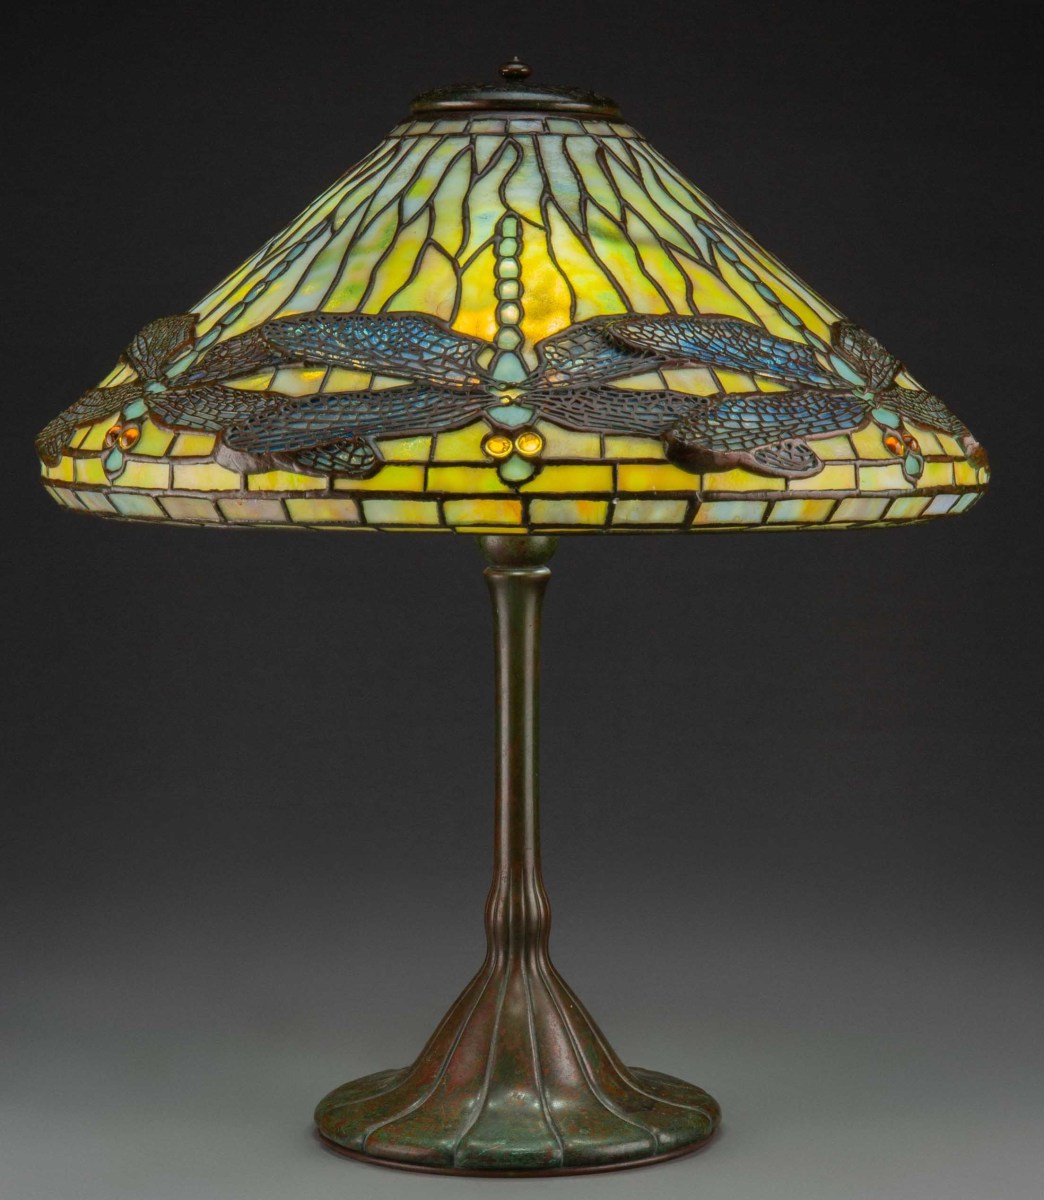 Tiffany in Bloom: Stained Glass Lamps of Louis Comfort Tiffany - News &  Events - Team Antiques